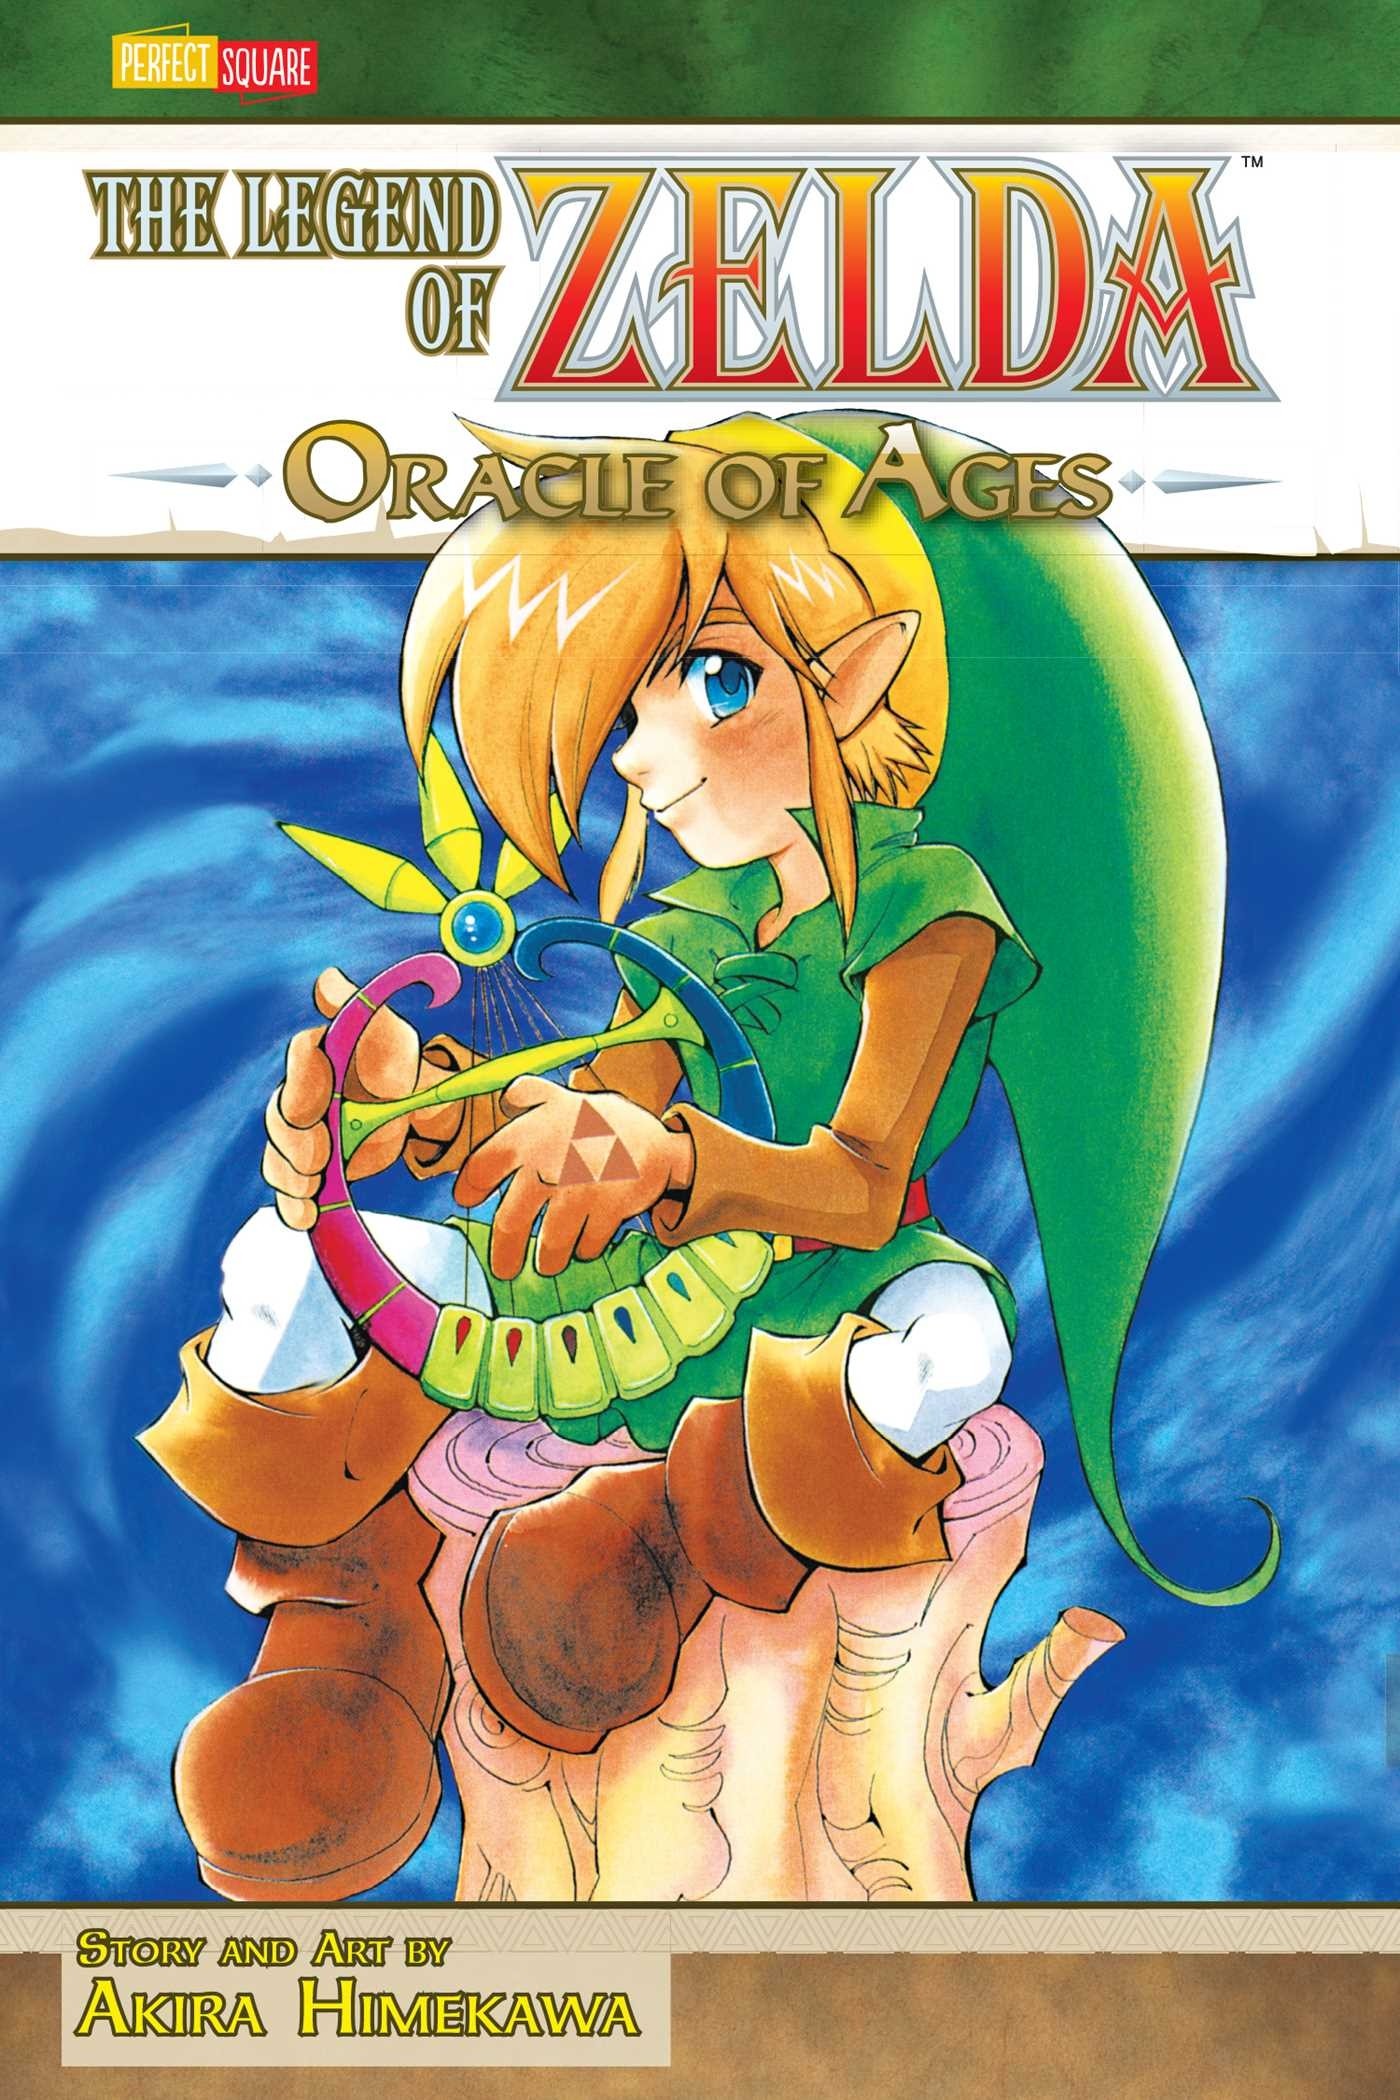 The Legend of Zelda, Vol. 05 -Oracle of Ages-